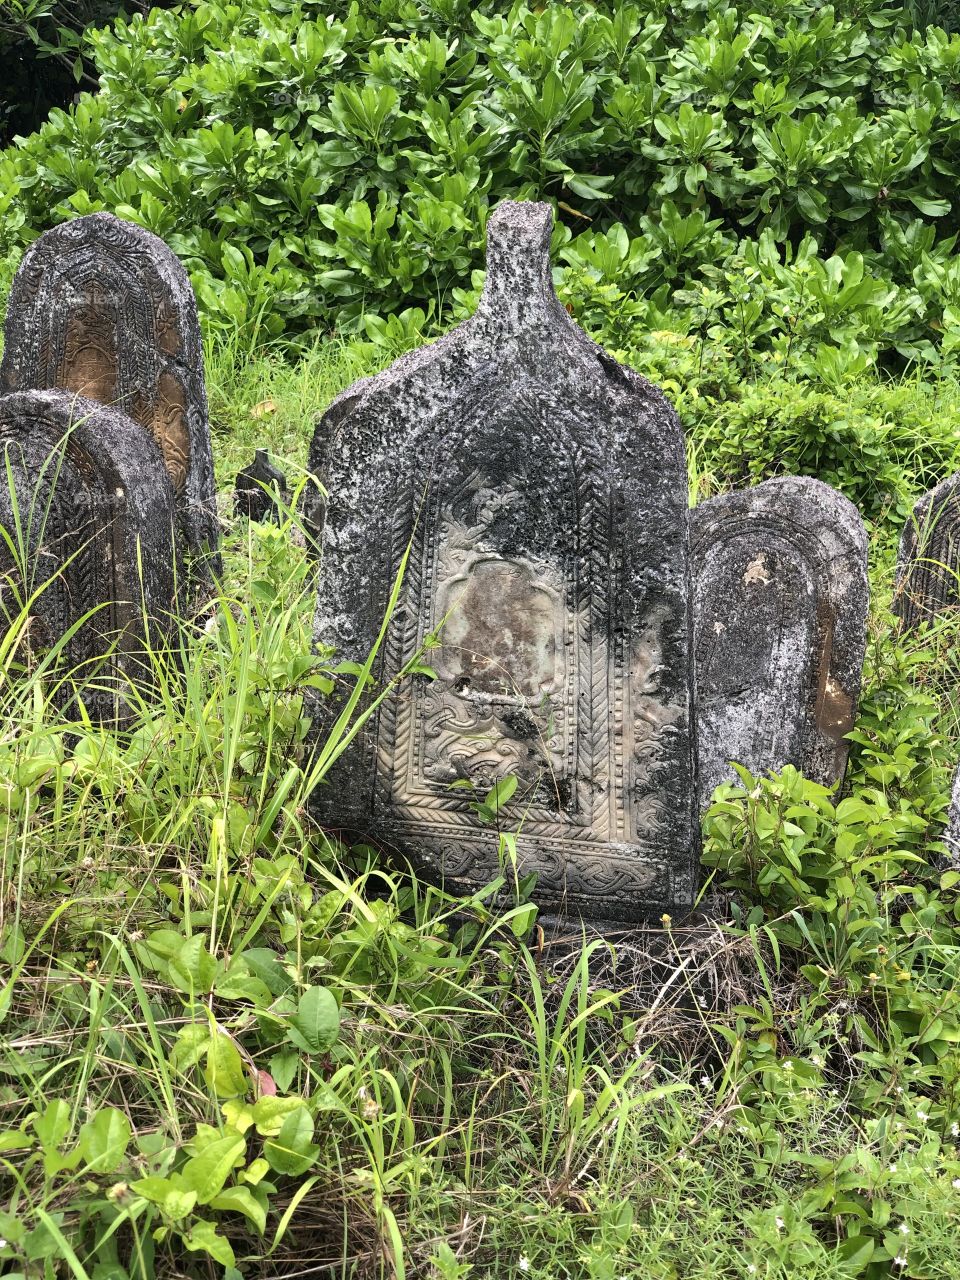 Nice stone curving by locals of #Hdh nolhivaramfaru @6_41_50_N_73_07_15_E found in an old cemetery believe to be more than 250years.  